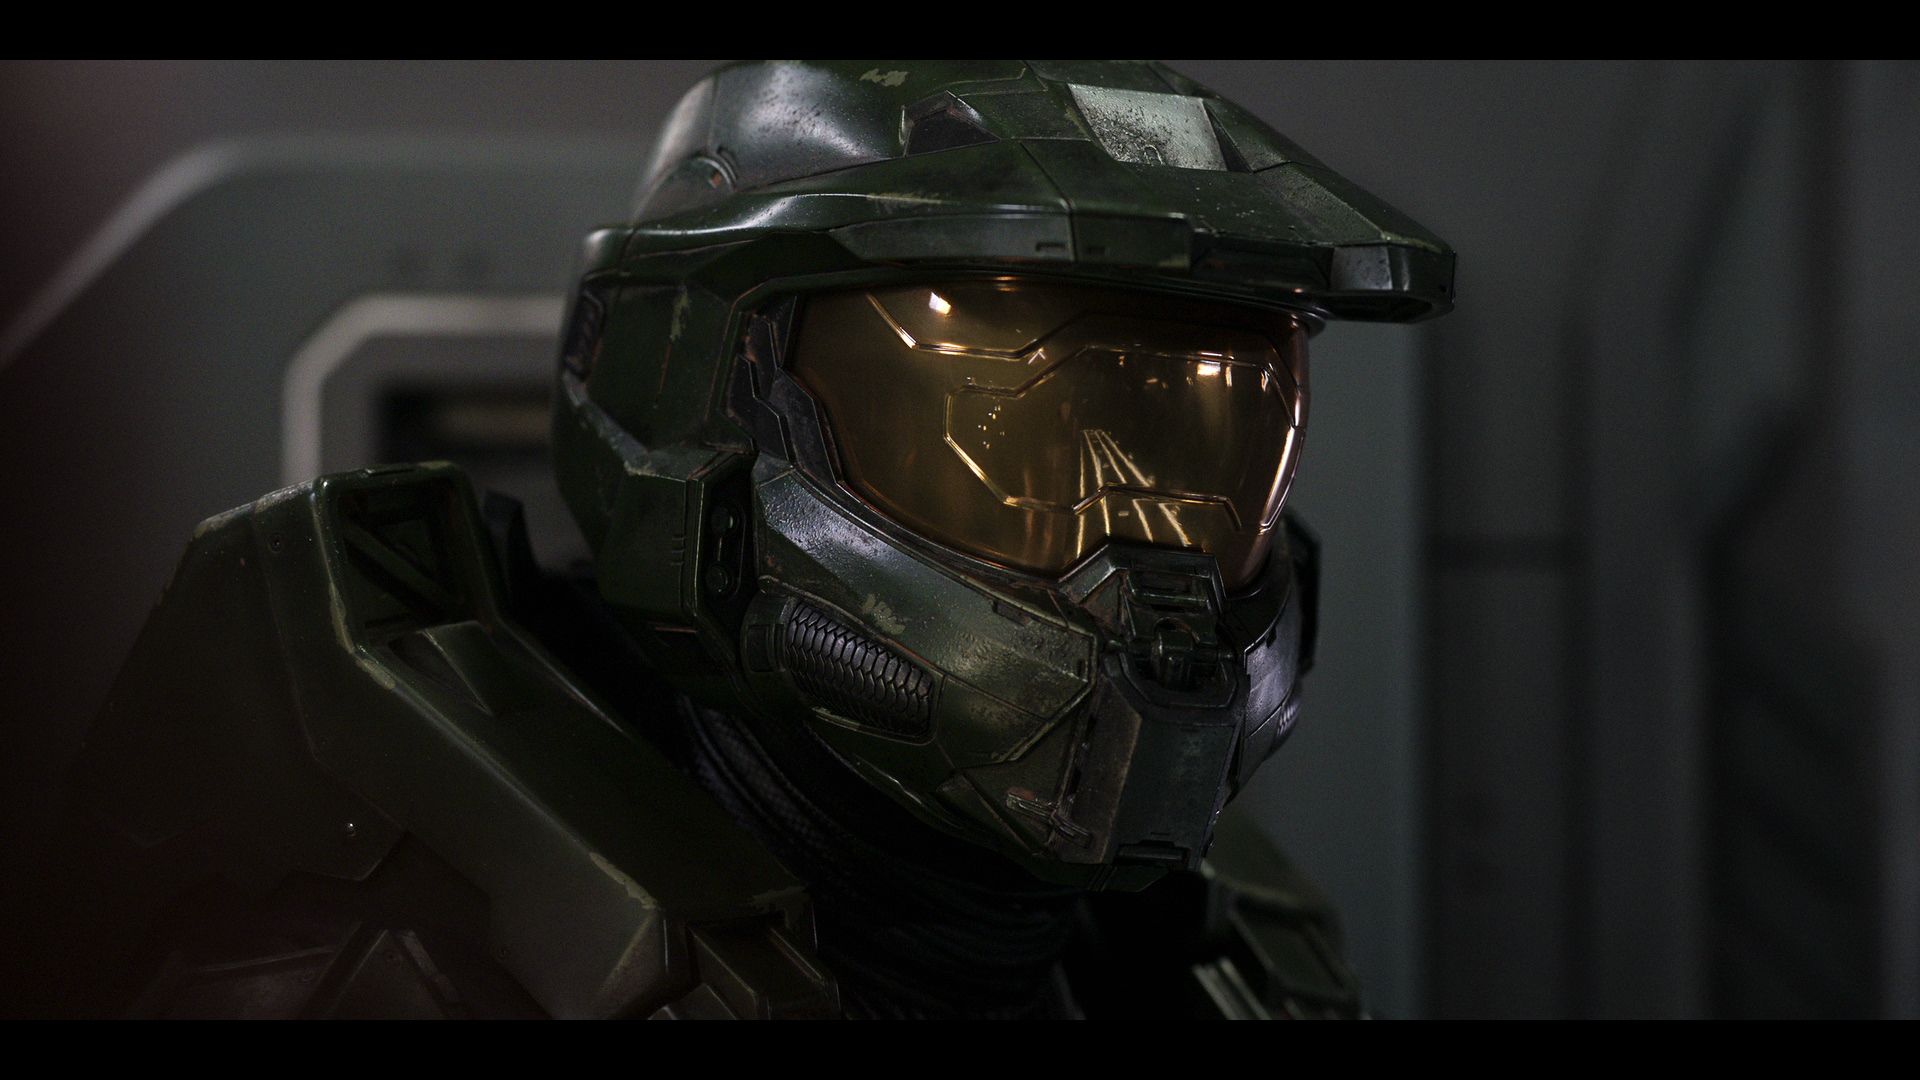 New Details on Paramount Halo Live-Action Series